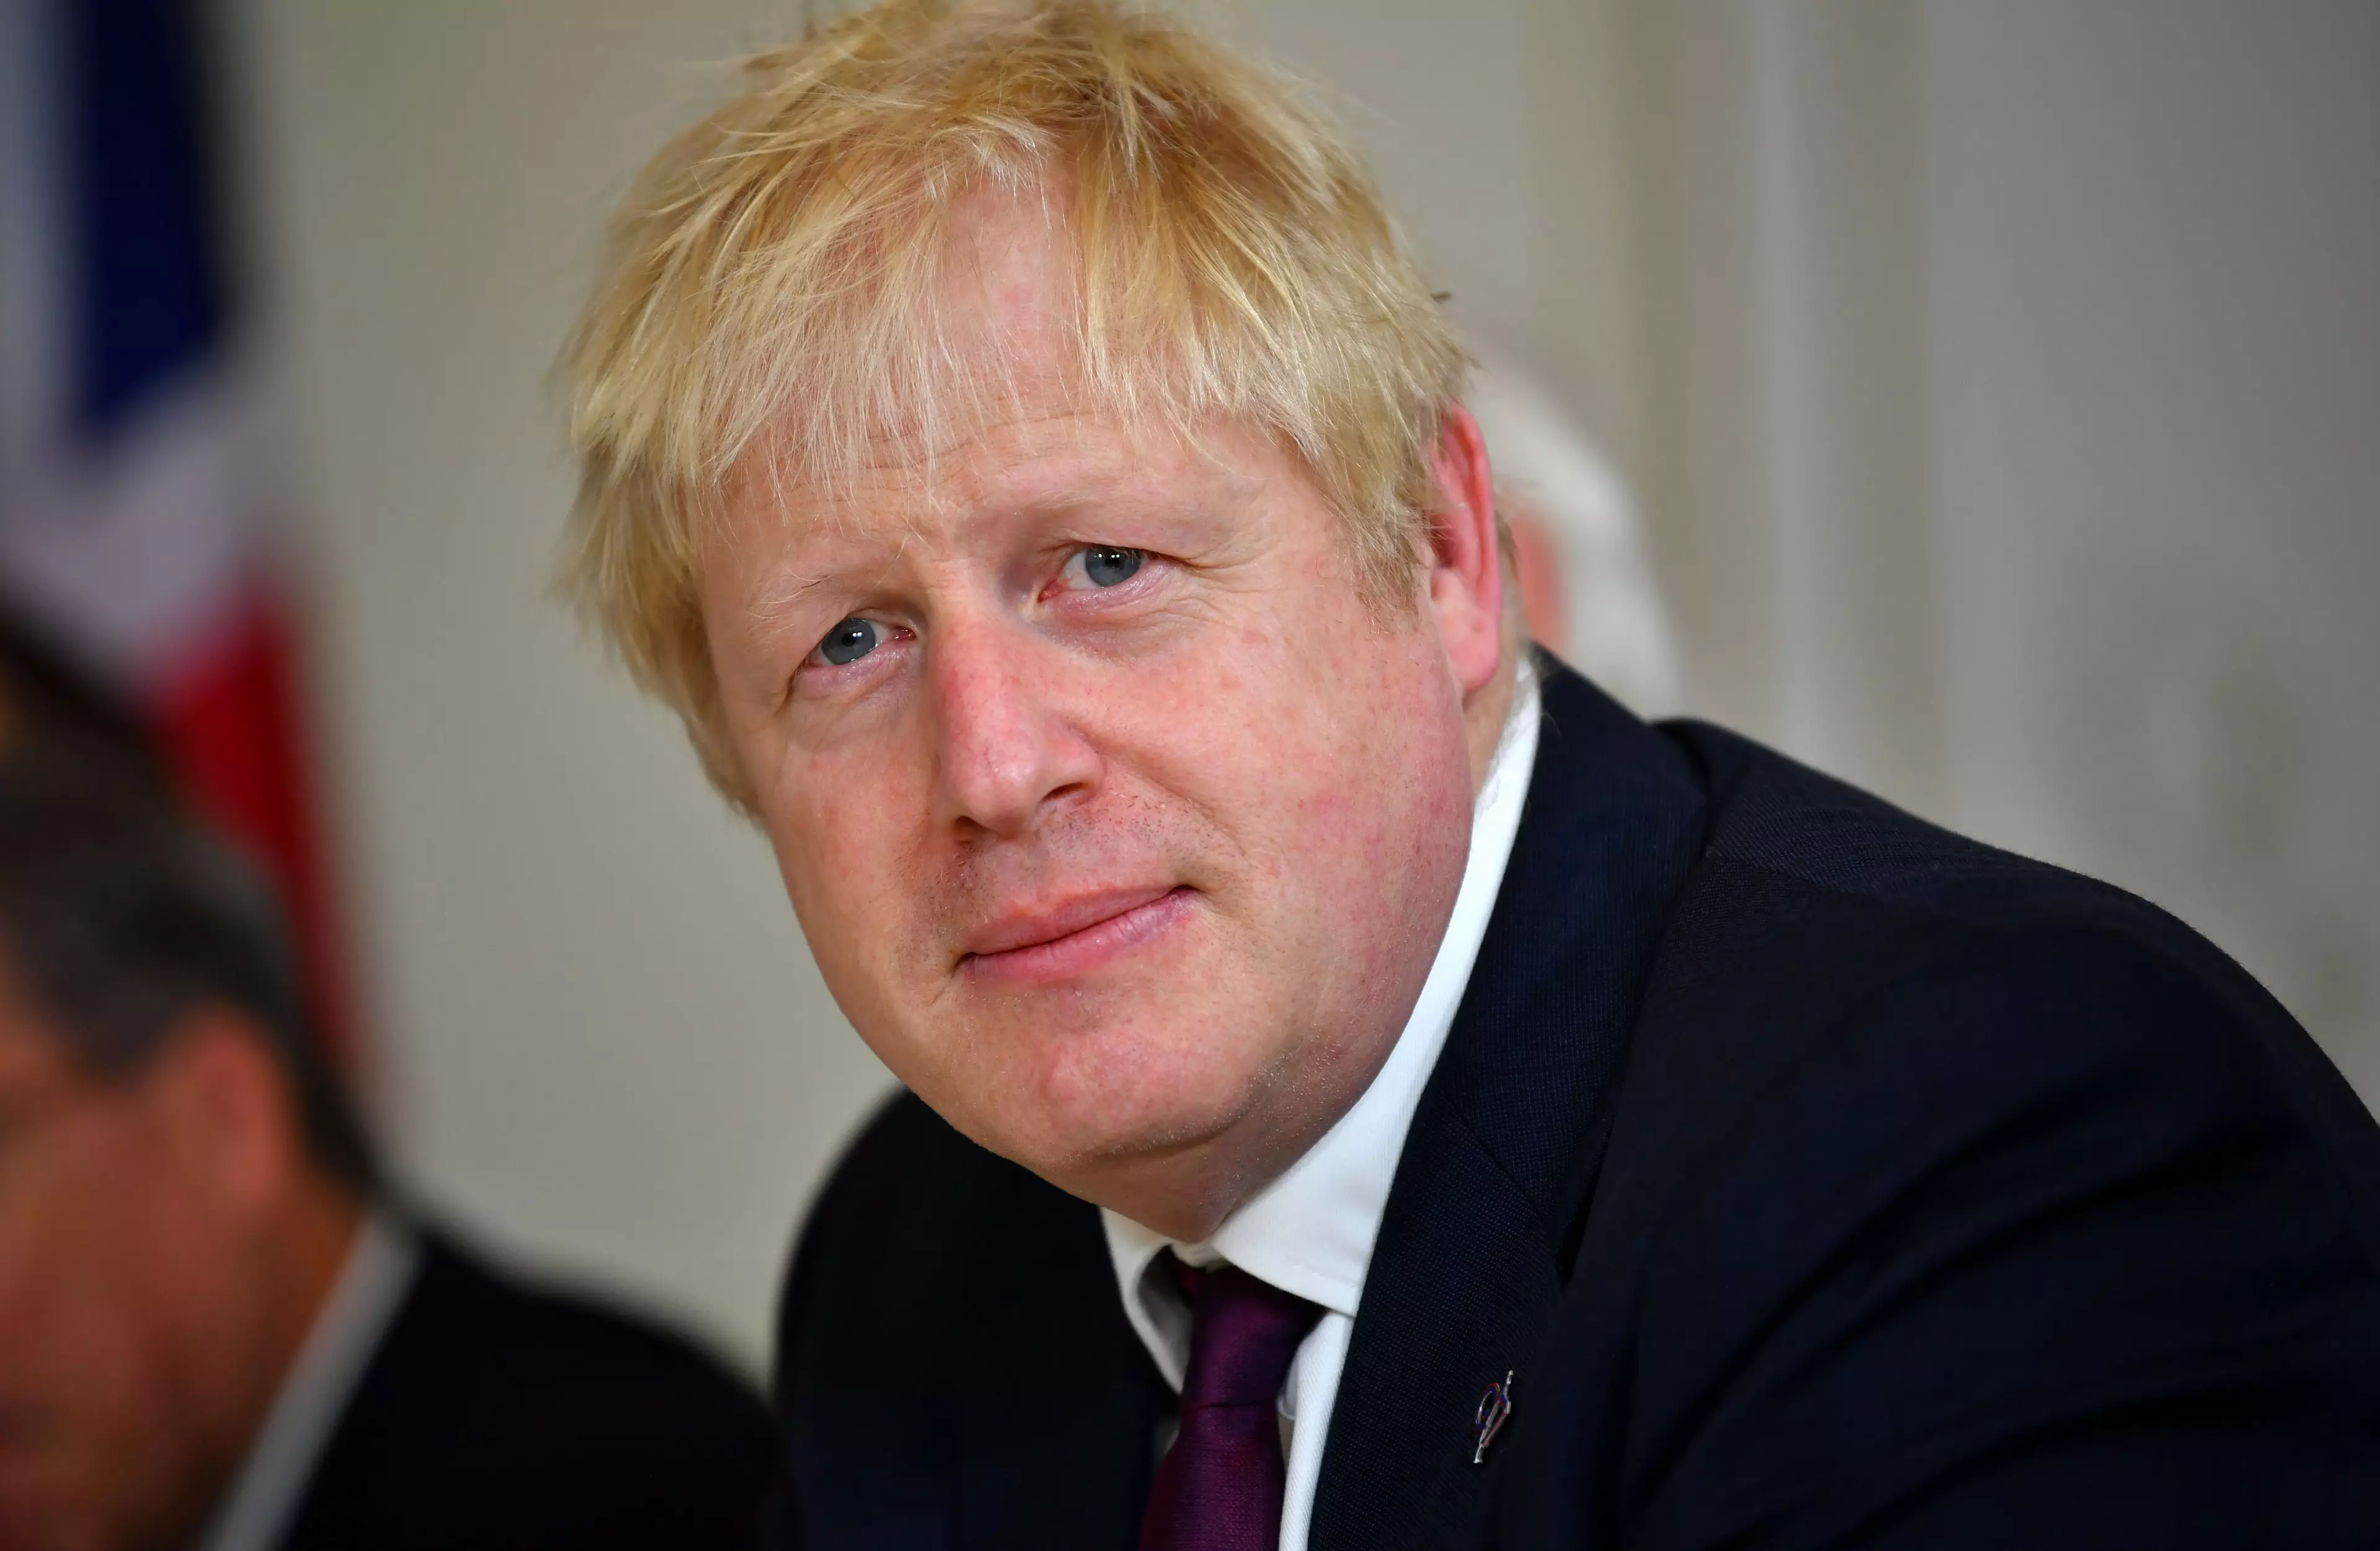 Critics have said that Johnson is trying to stop parliament blocking a No Deal Brexit.